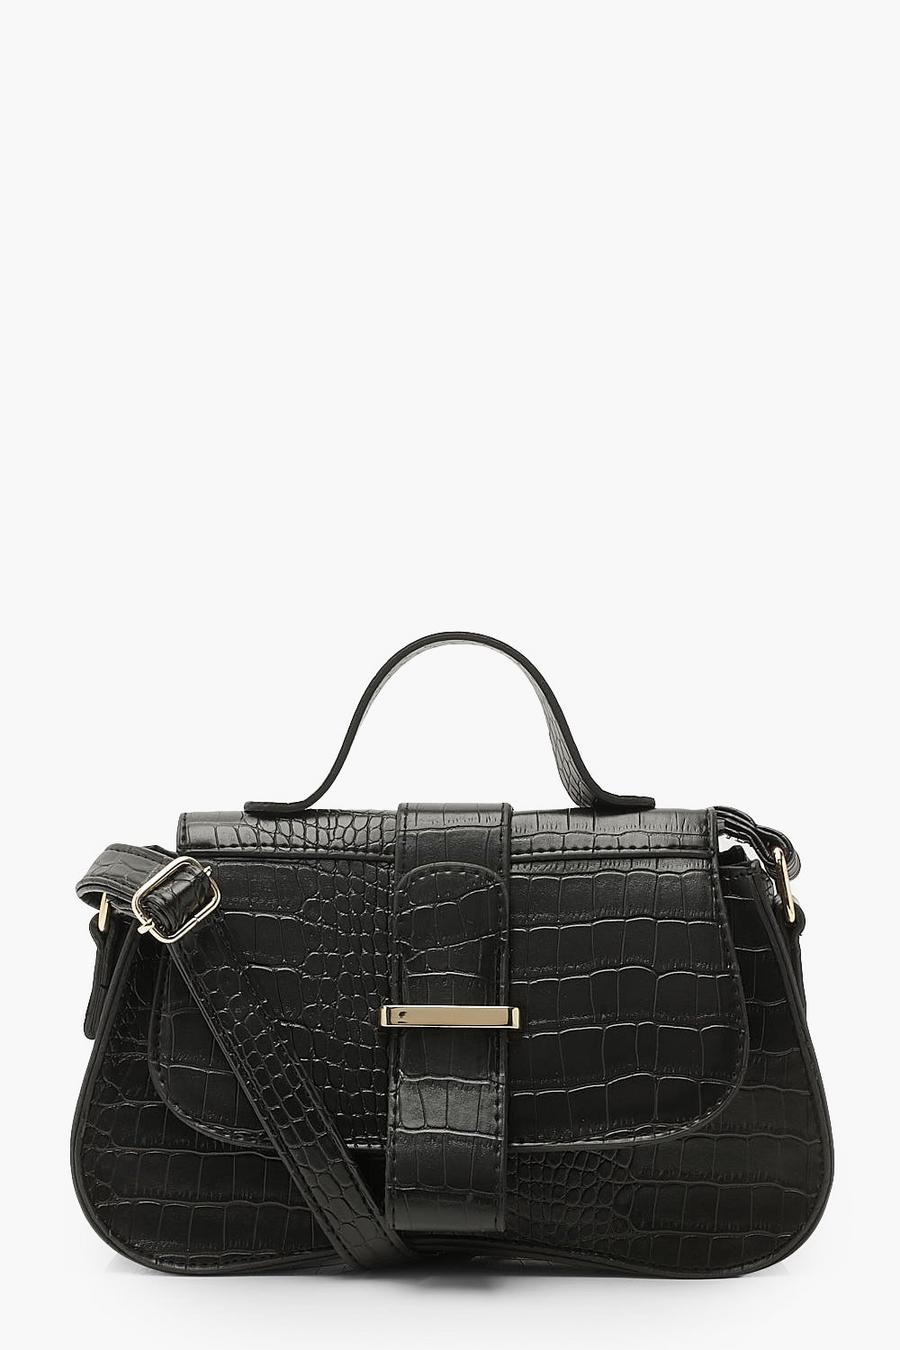 Black Croc Structured Arch Edge Cross Body Bag image number 1